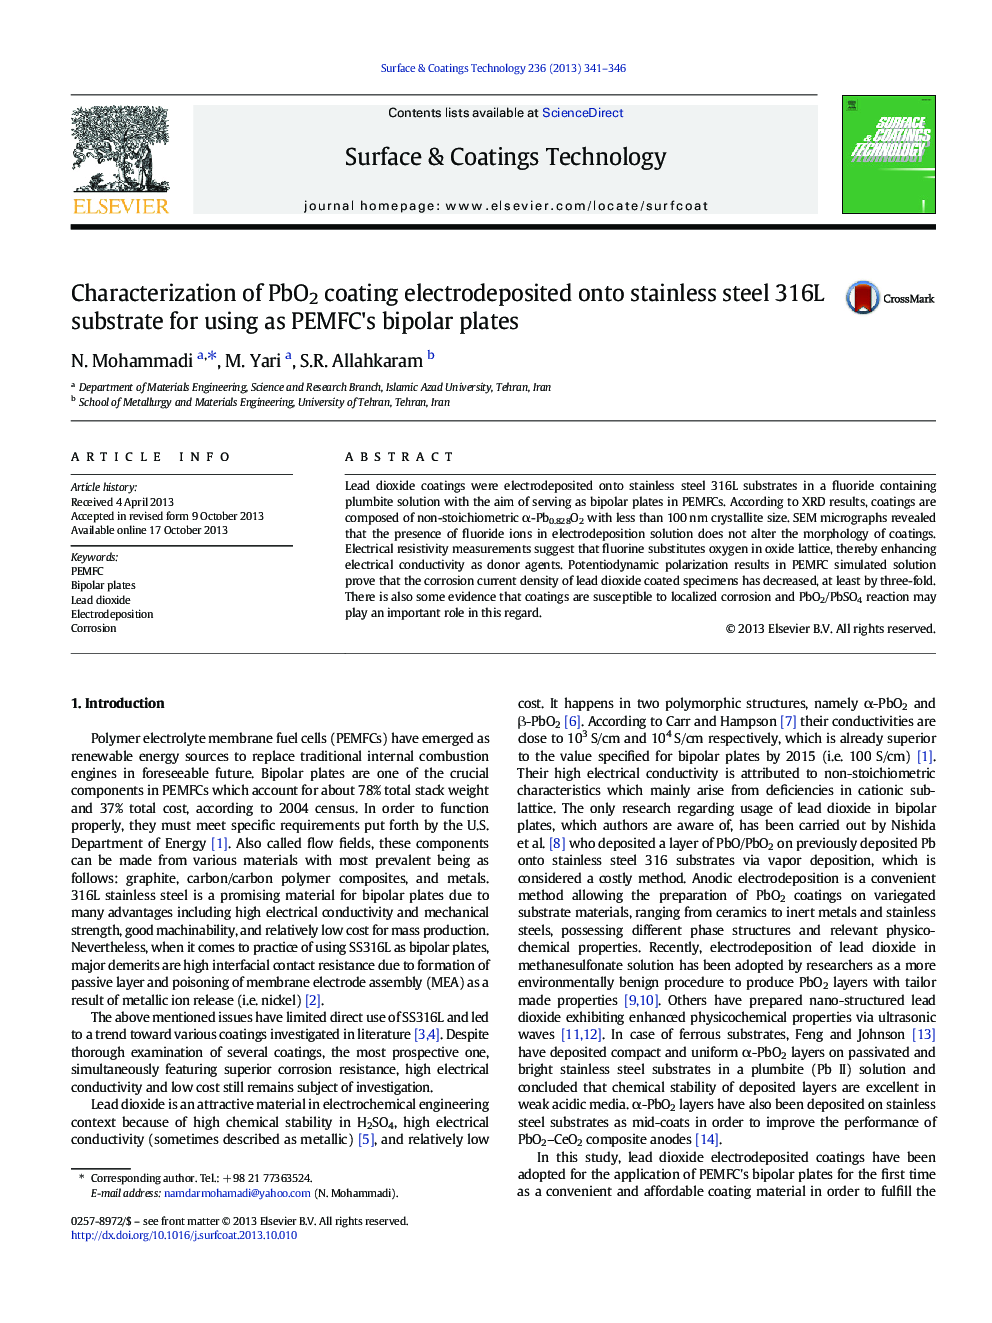 Characterization of PbO2 coating electrodeposited onto stainless steel 316L substrate for using as PEMFC's bipolar plates